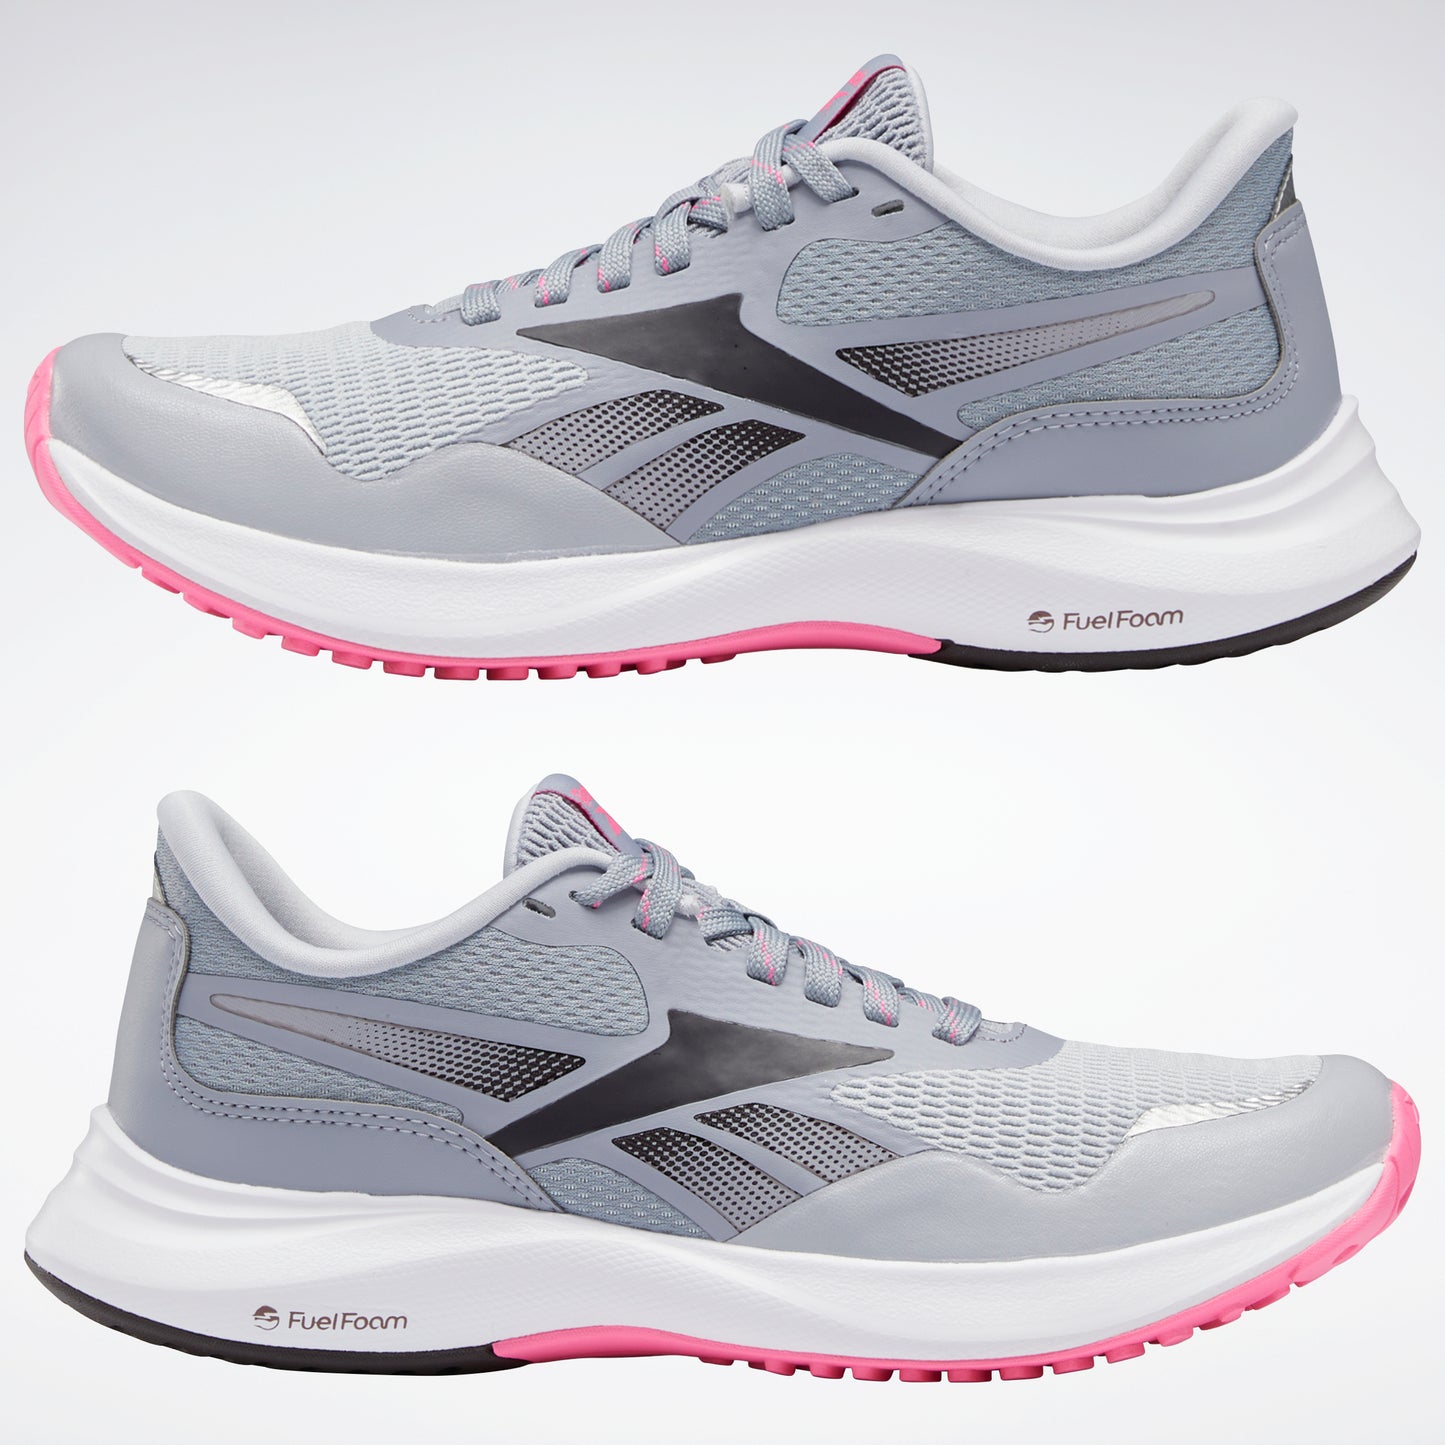 Reebok Footwear Women Endless Road 3 Shoes Clgry3/Cdgry2/Prpaby